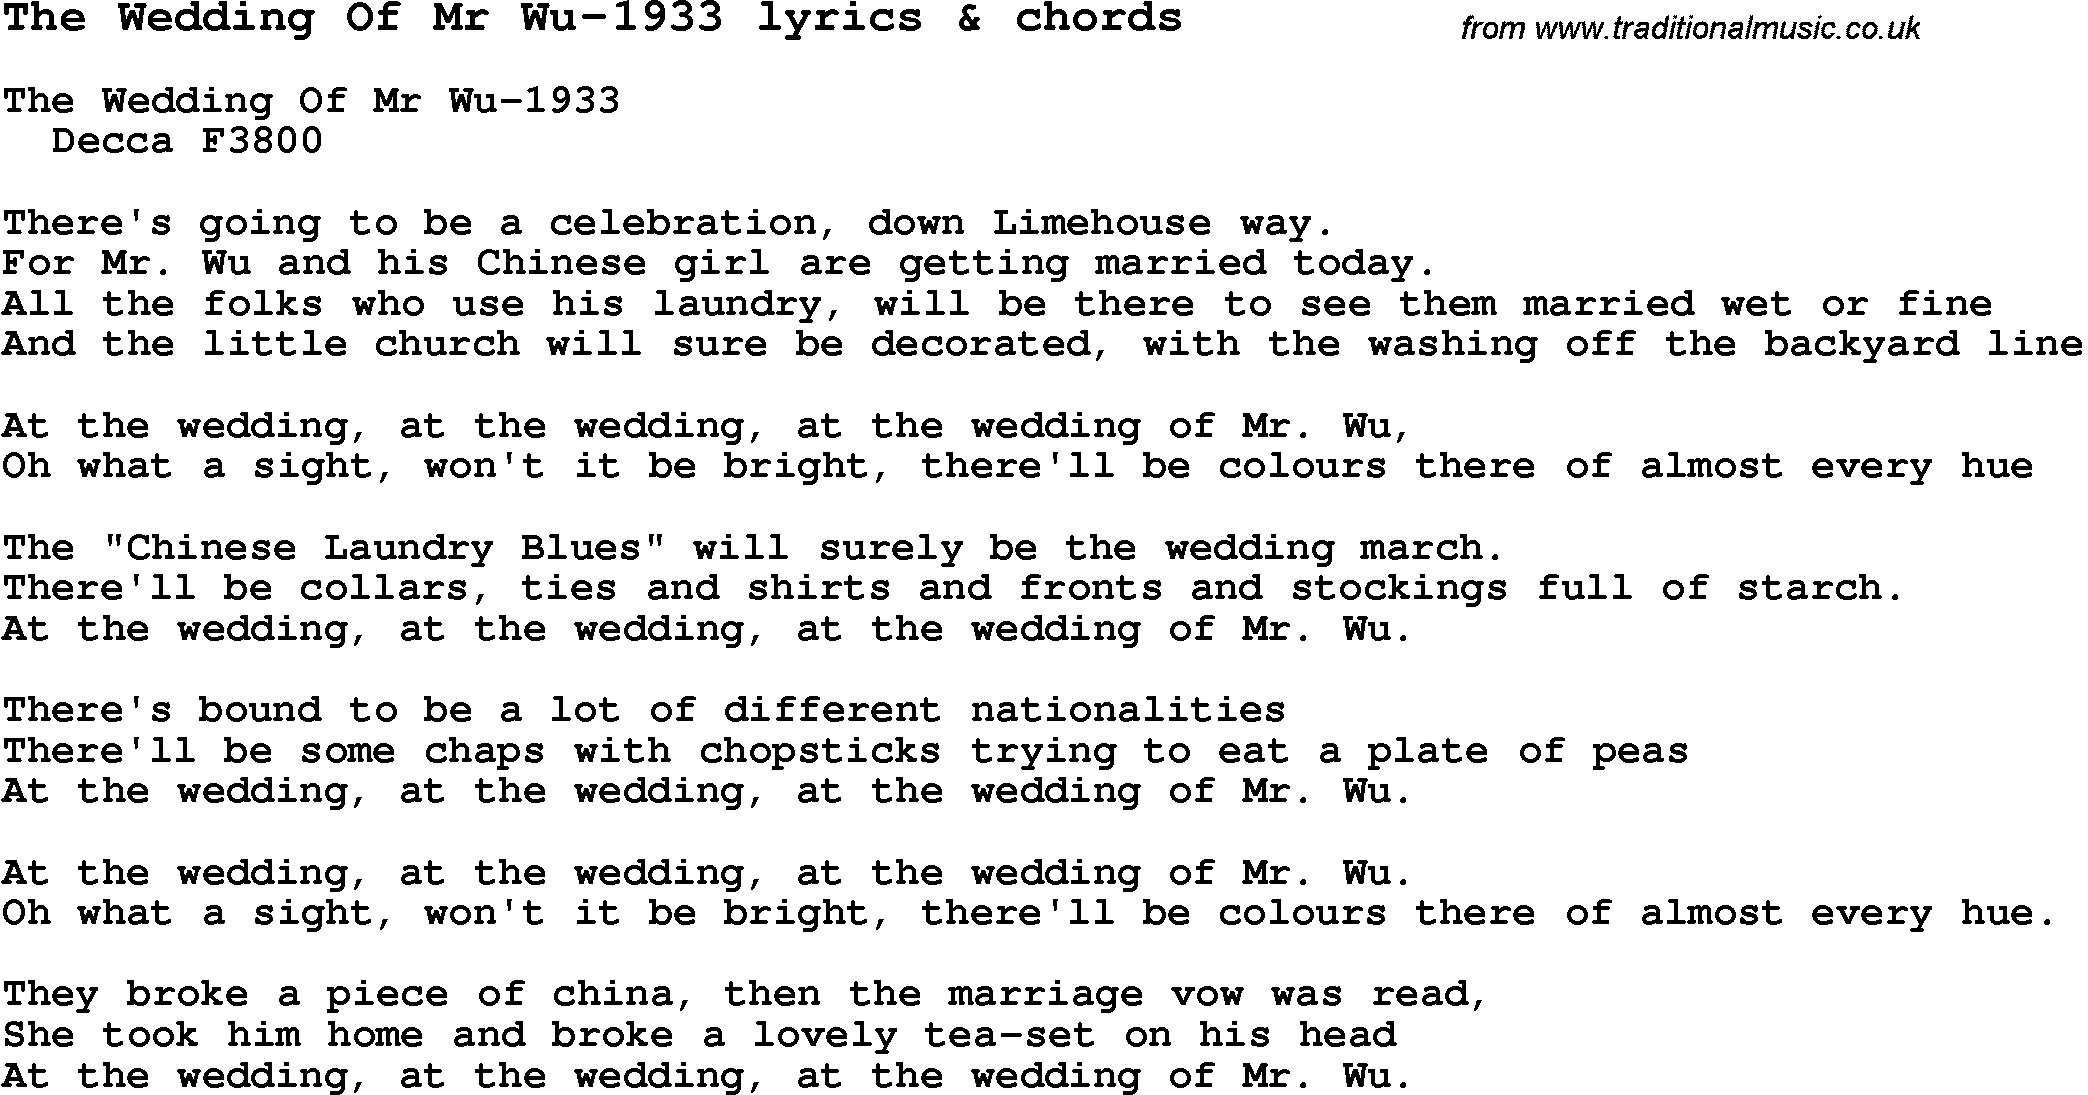 Love Song Lyrics for: The Wedding Of Mr Wu-1933 with chords for ...